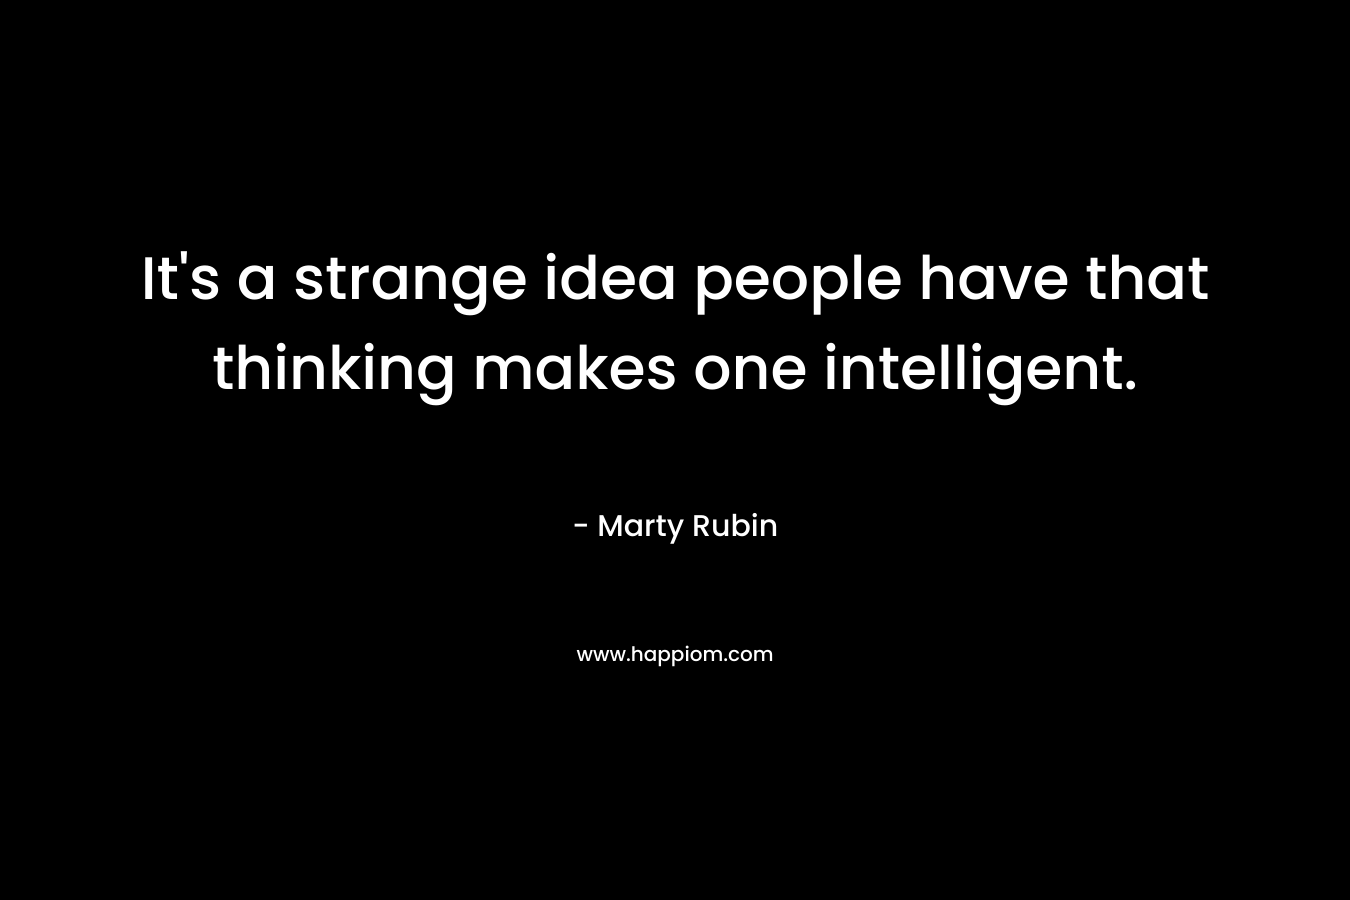 It's a strange idea people have that thinking makes one intelligent.